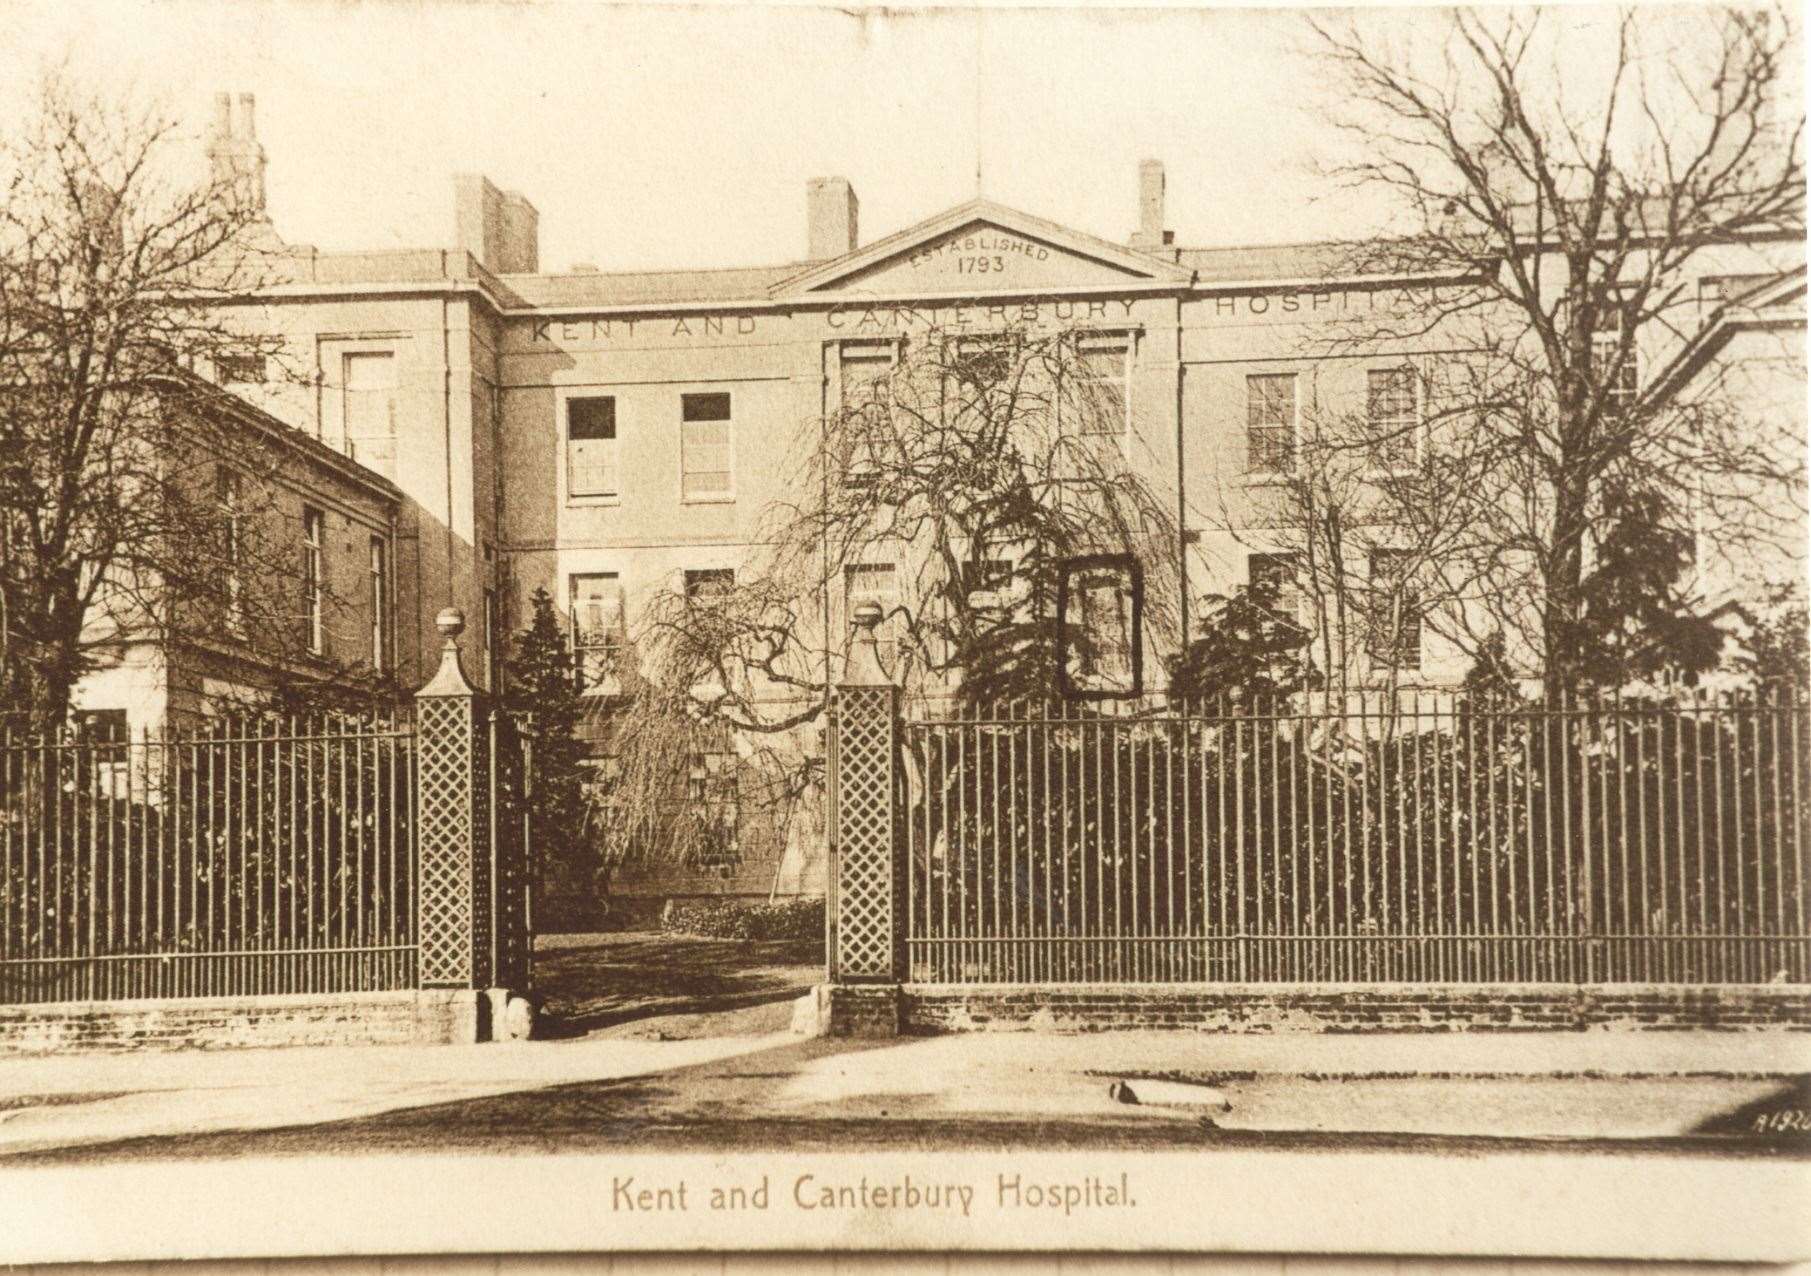 The old Kent and Canterbury Hospital at Longport, near St Augustine's Abbey, pictured in the early 20th century